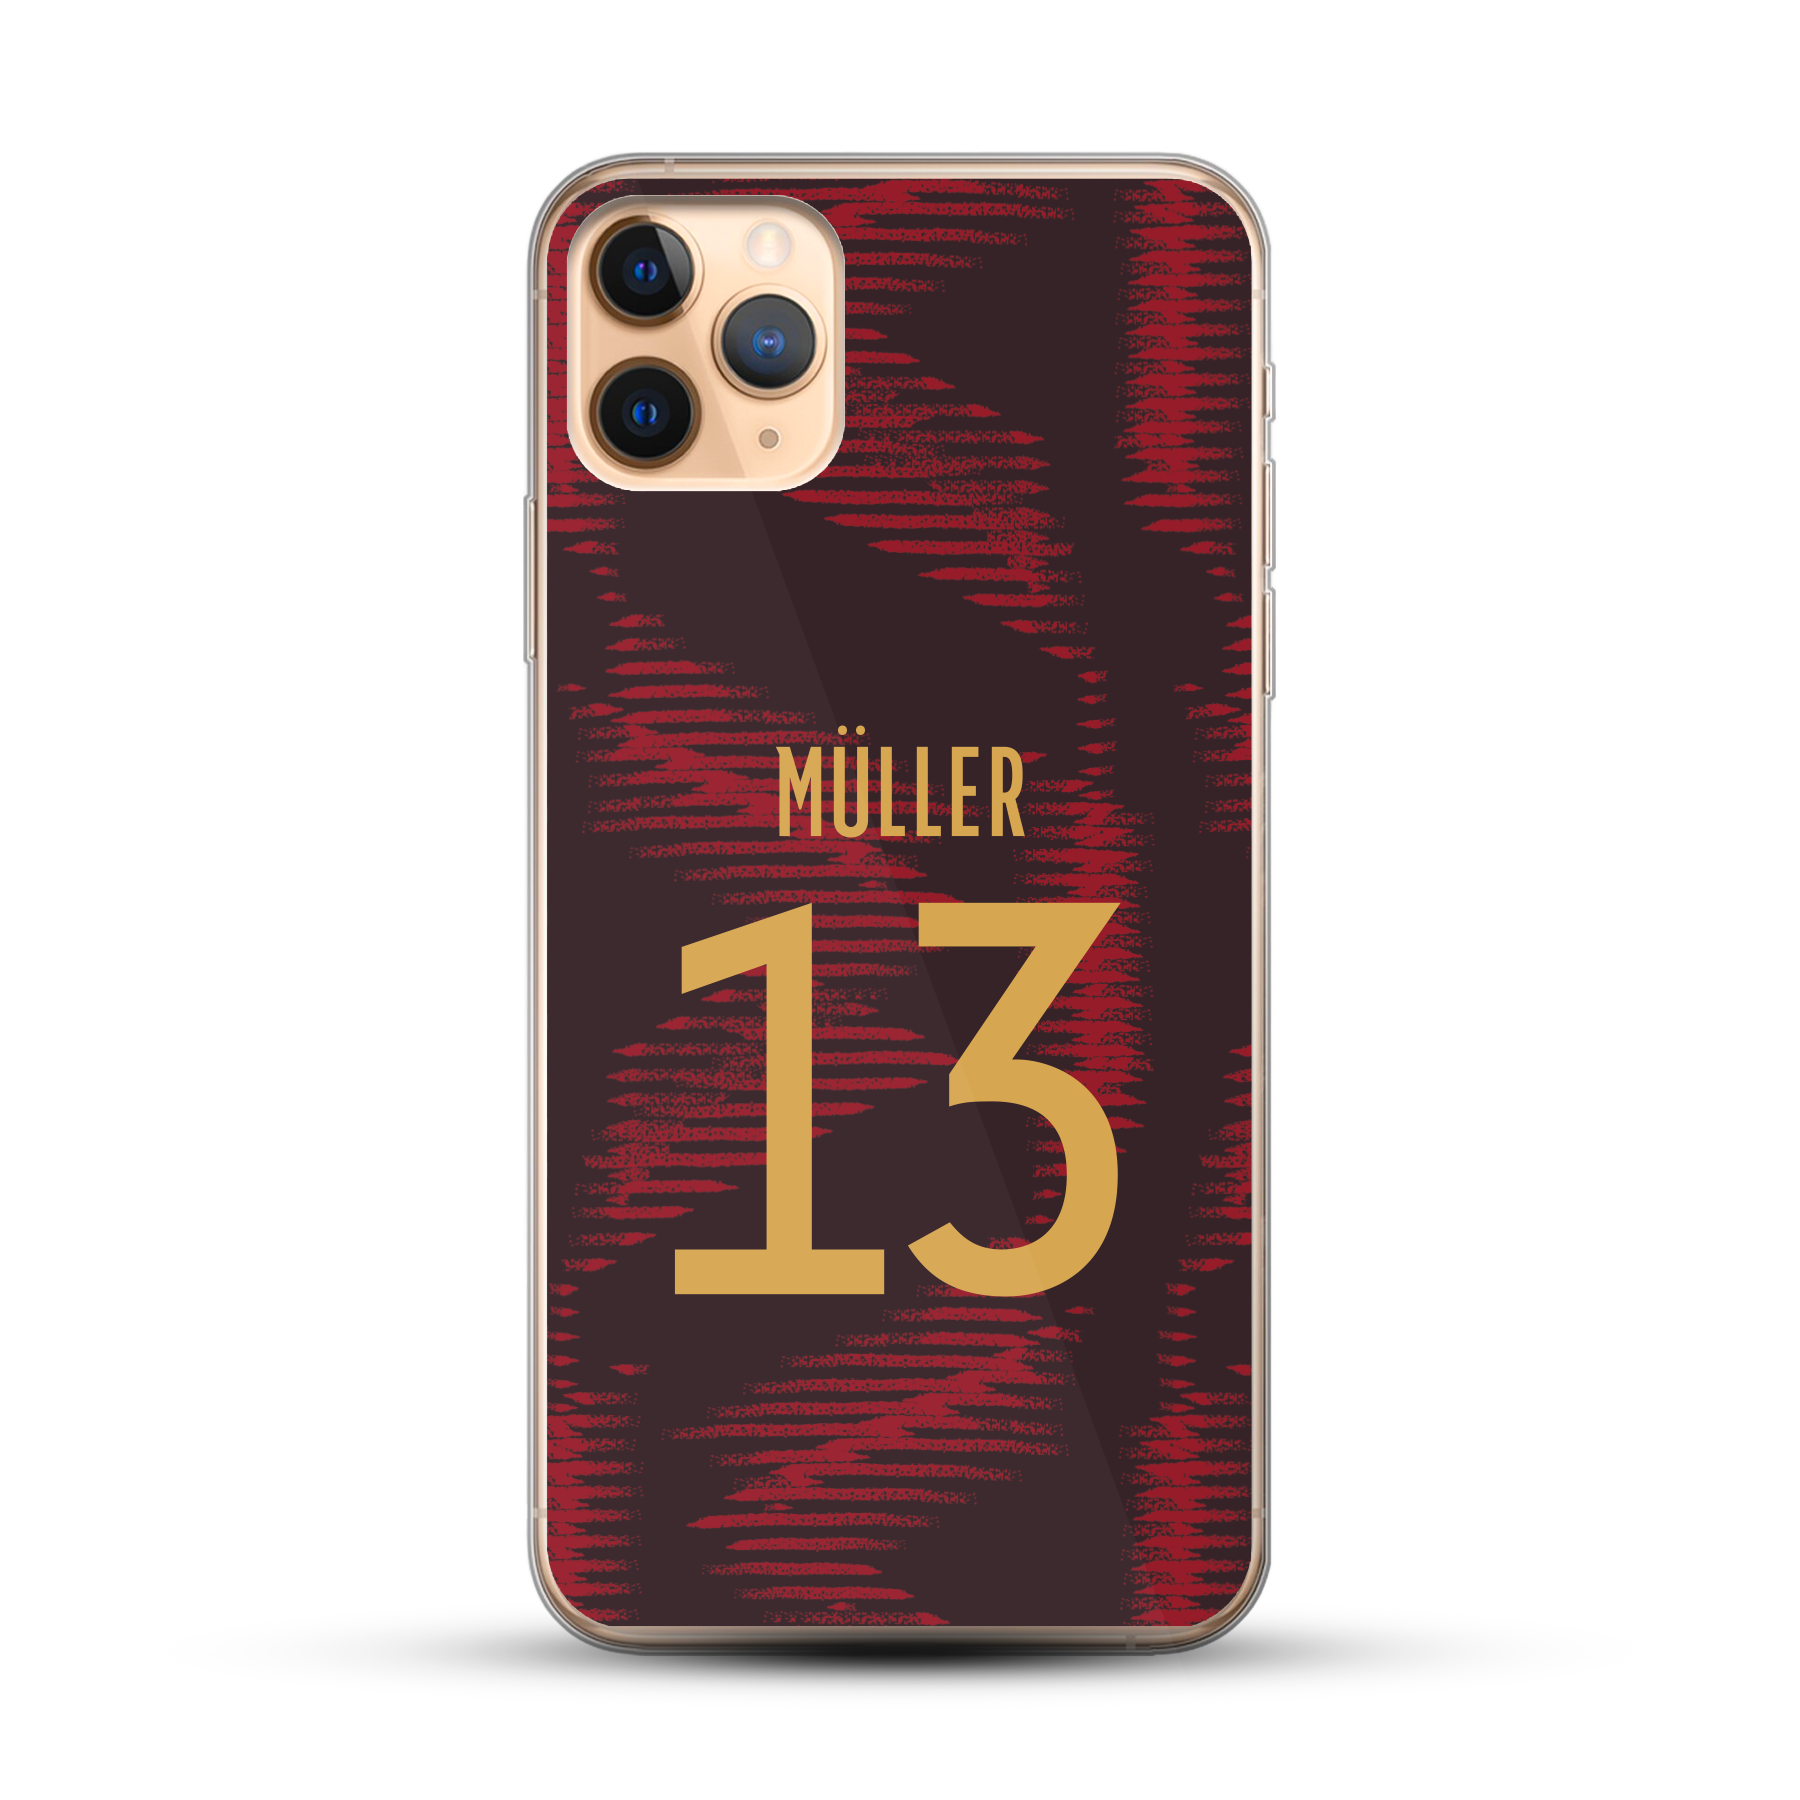 Germany 2022 (World Cup) - Away Kit Phone Case